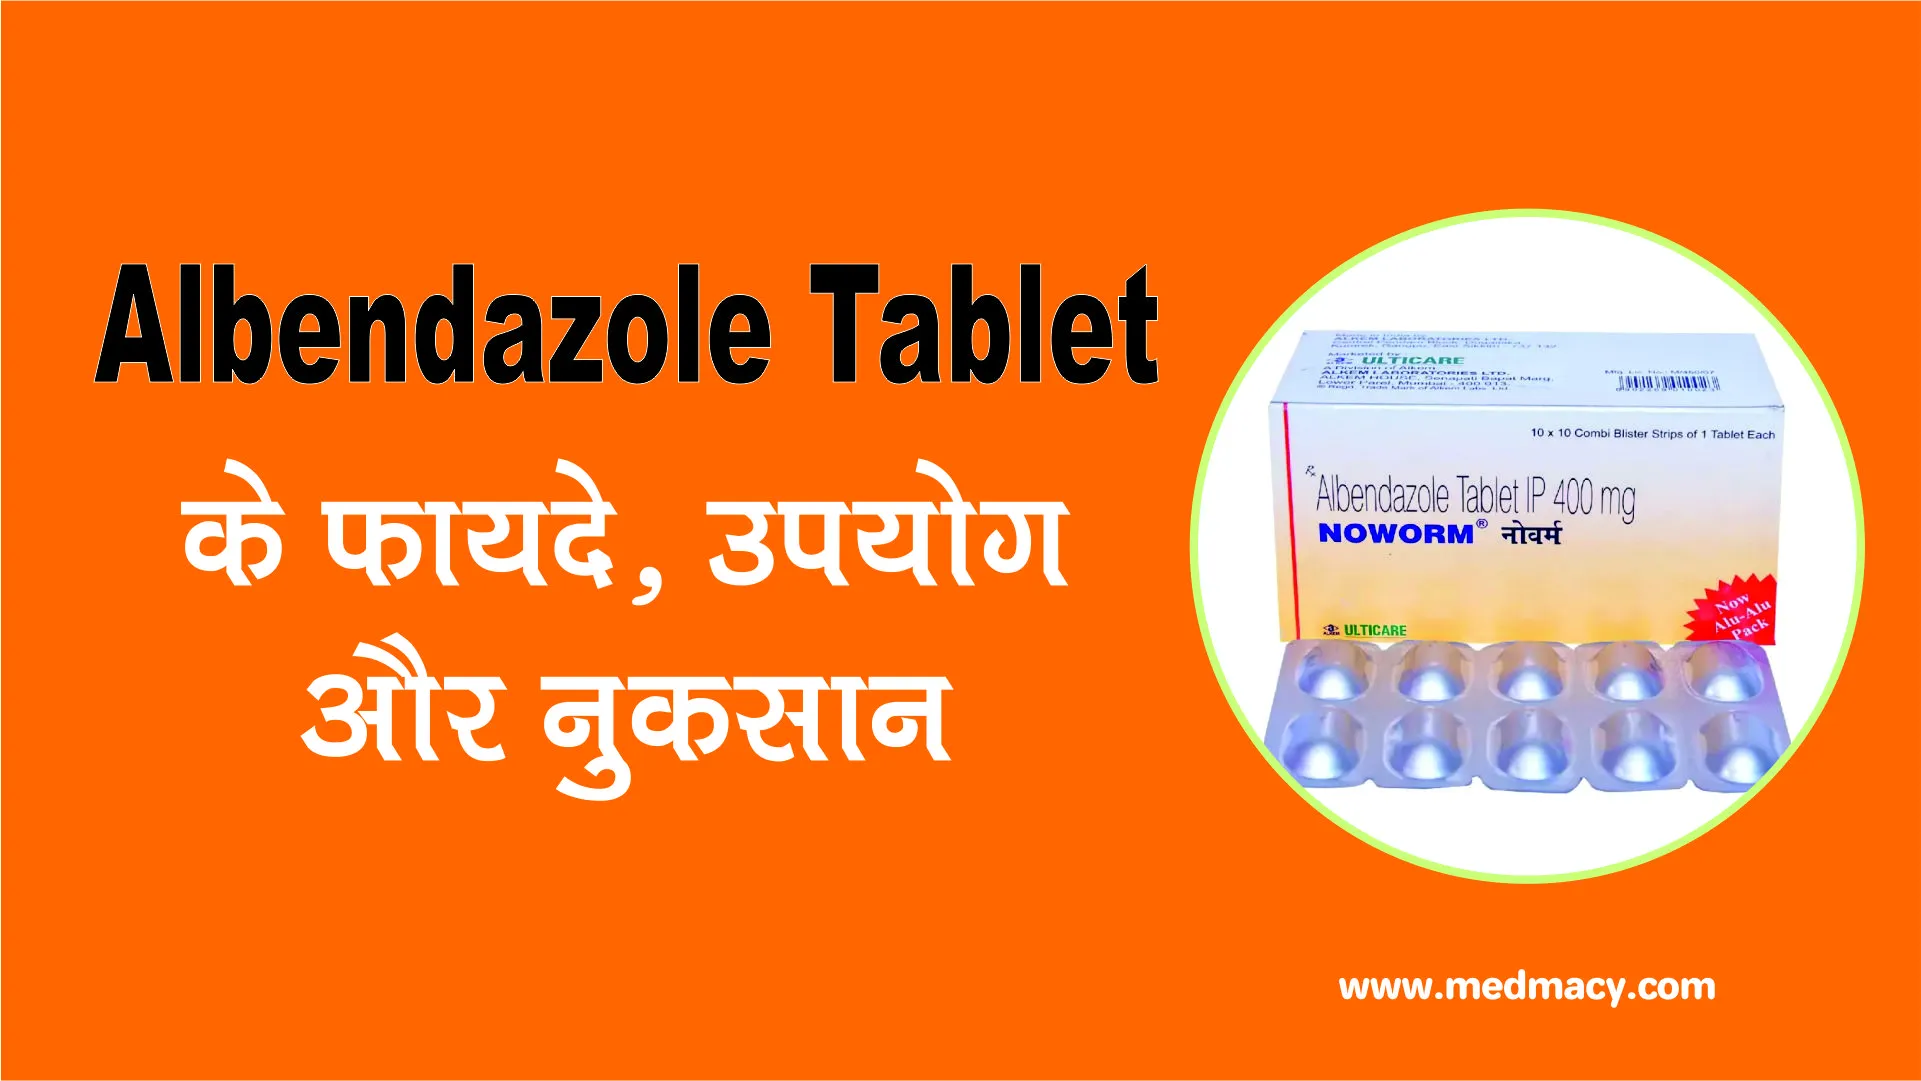 Albendazole Tablet uses in Hindi